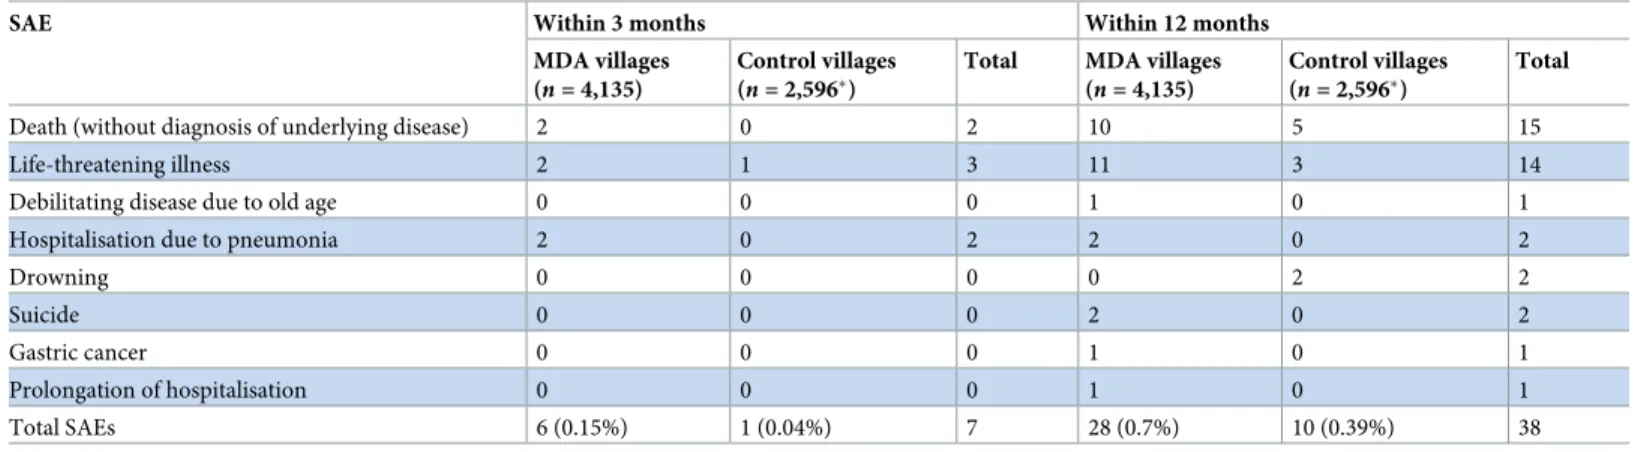 Table 4. SAEs within 3 months of MDA in villages with early MDA compared to control villages with deferred MDA for the first 12 months.